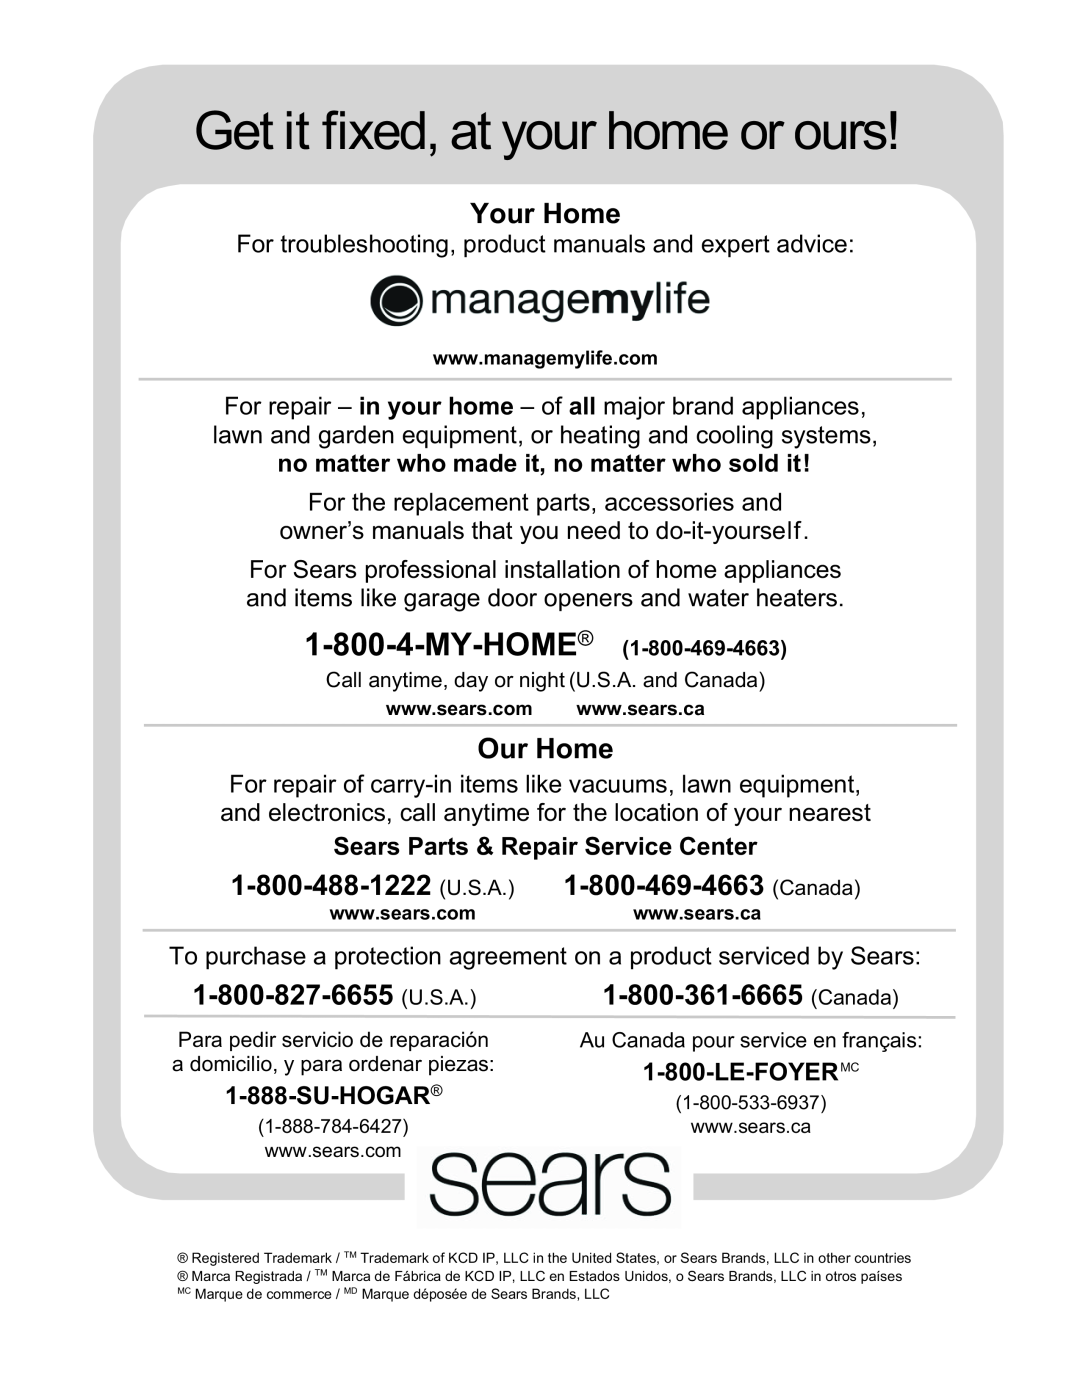 Kenmore 790 manual Your Home, Our Home, Sears Parts & Repair Service Center, Su-Hogar, Get it fixed, at your home or ours 